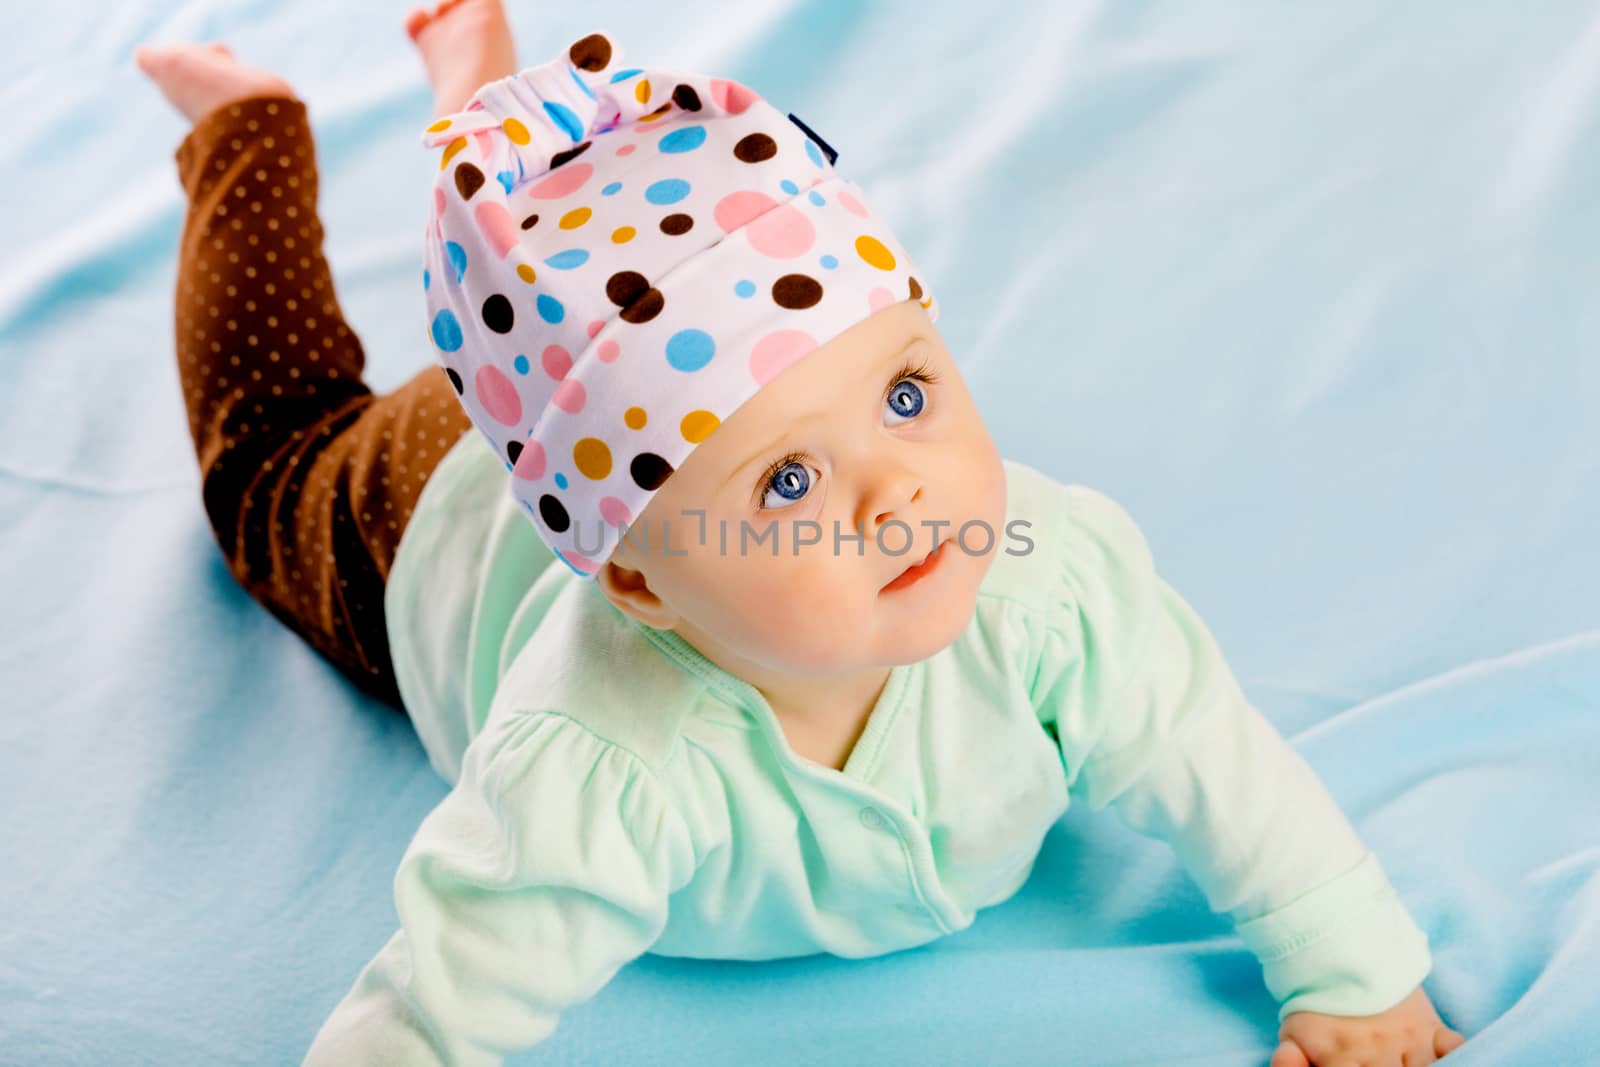 Charming baby girl in a hat. Studio